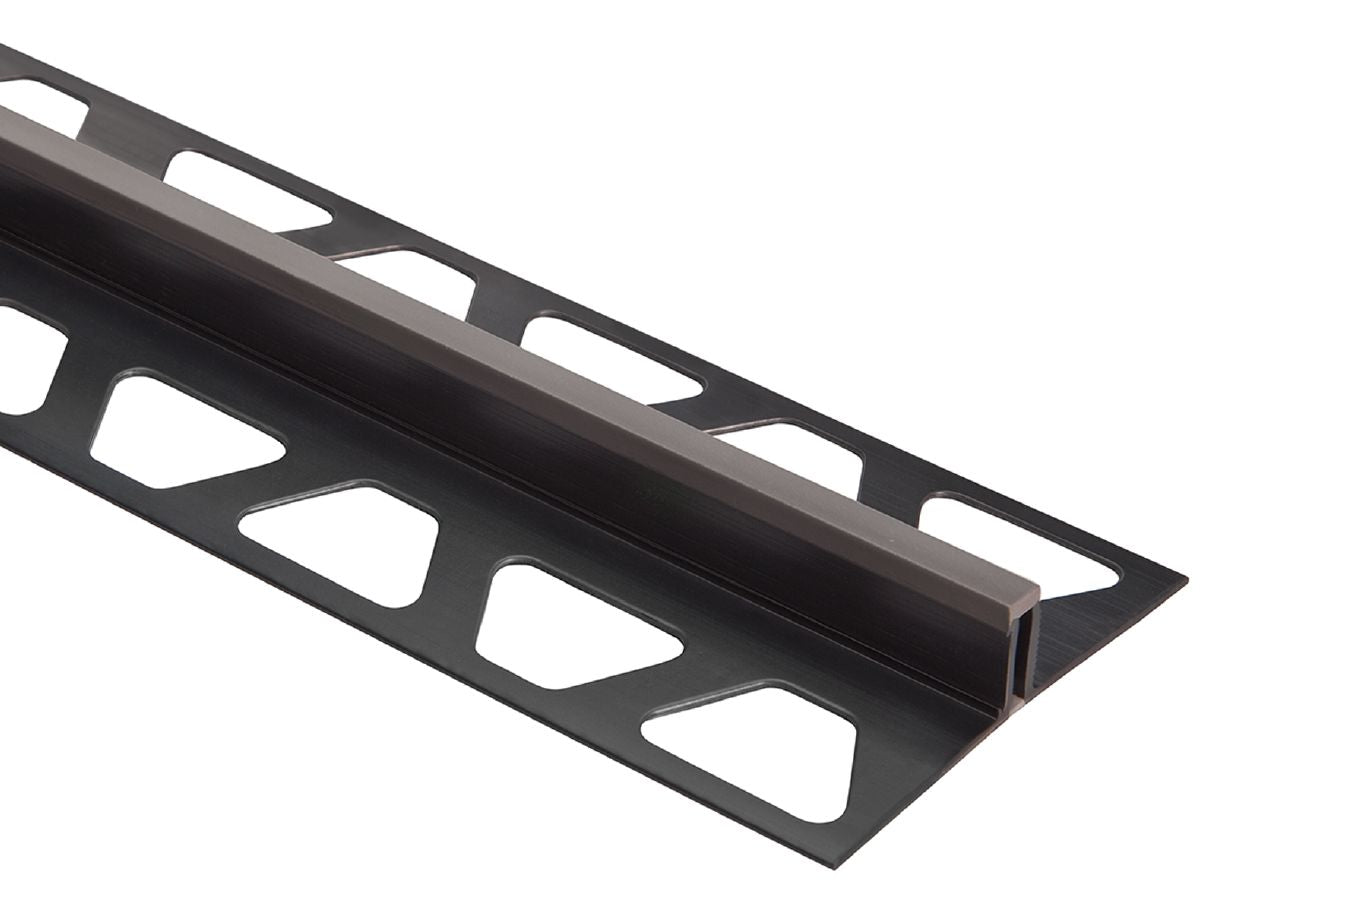 MAGMASCHLUTER SYSTEMS Schluter®-DILEX-BWS PVC surface joint profile with 3/16” (5 mm)-wide movement zone PVC Plasticdark anthracite4.5 mm (3/16")-250 cm (8' 2-1/2")SCHLUTER SYSTEMS Schluter®-DILEX-BWS PVC surface joint profile with 3/16” (5 mm)-wide movement zone